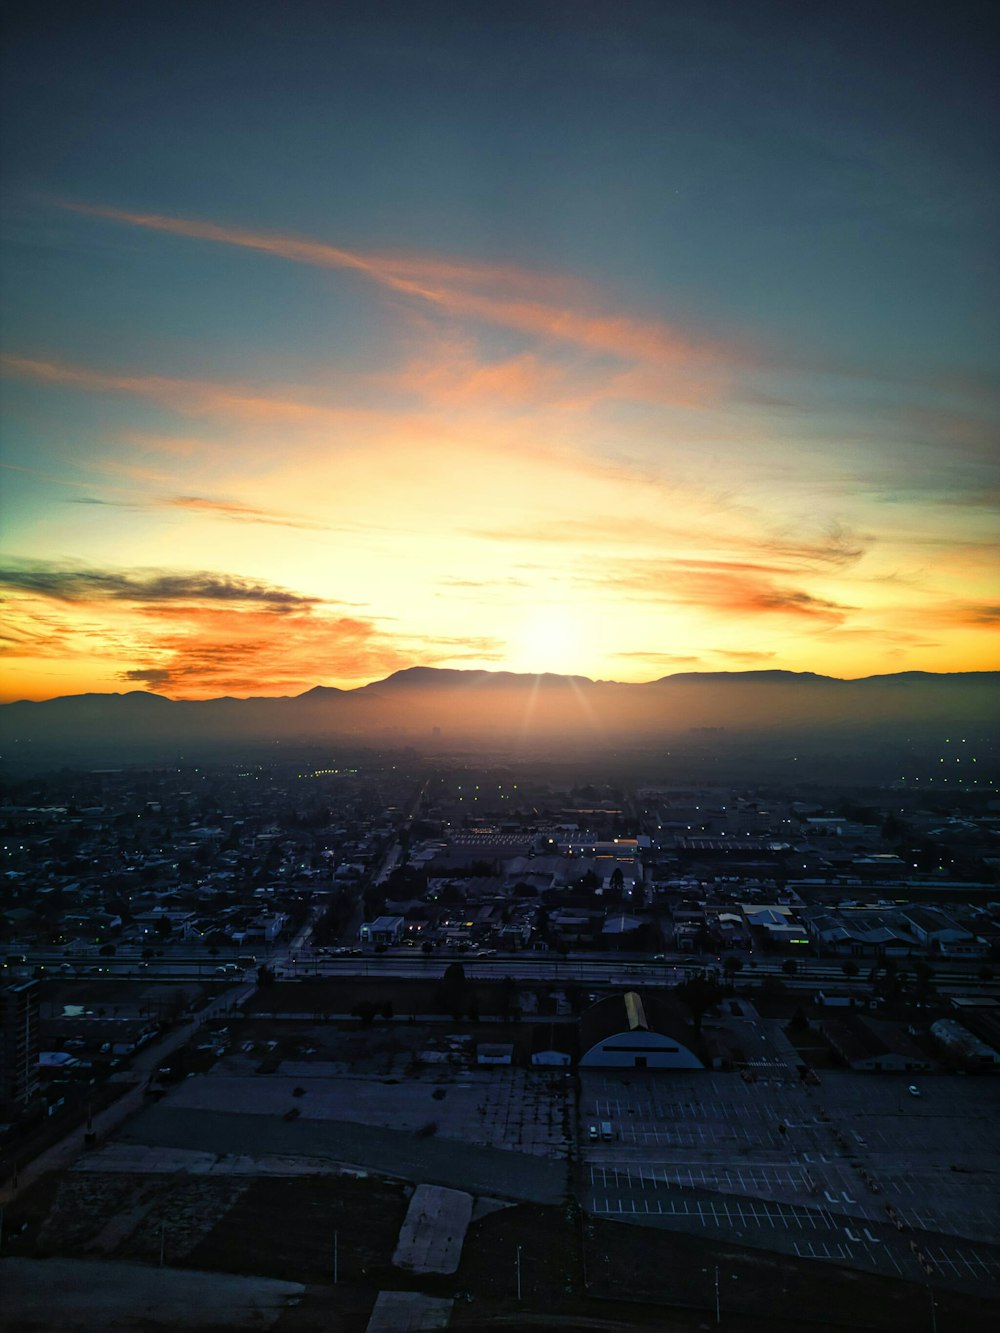 the sun is setting over a city with mountains in the background